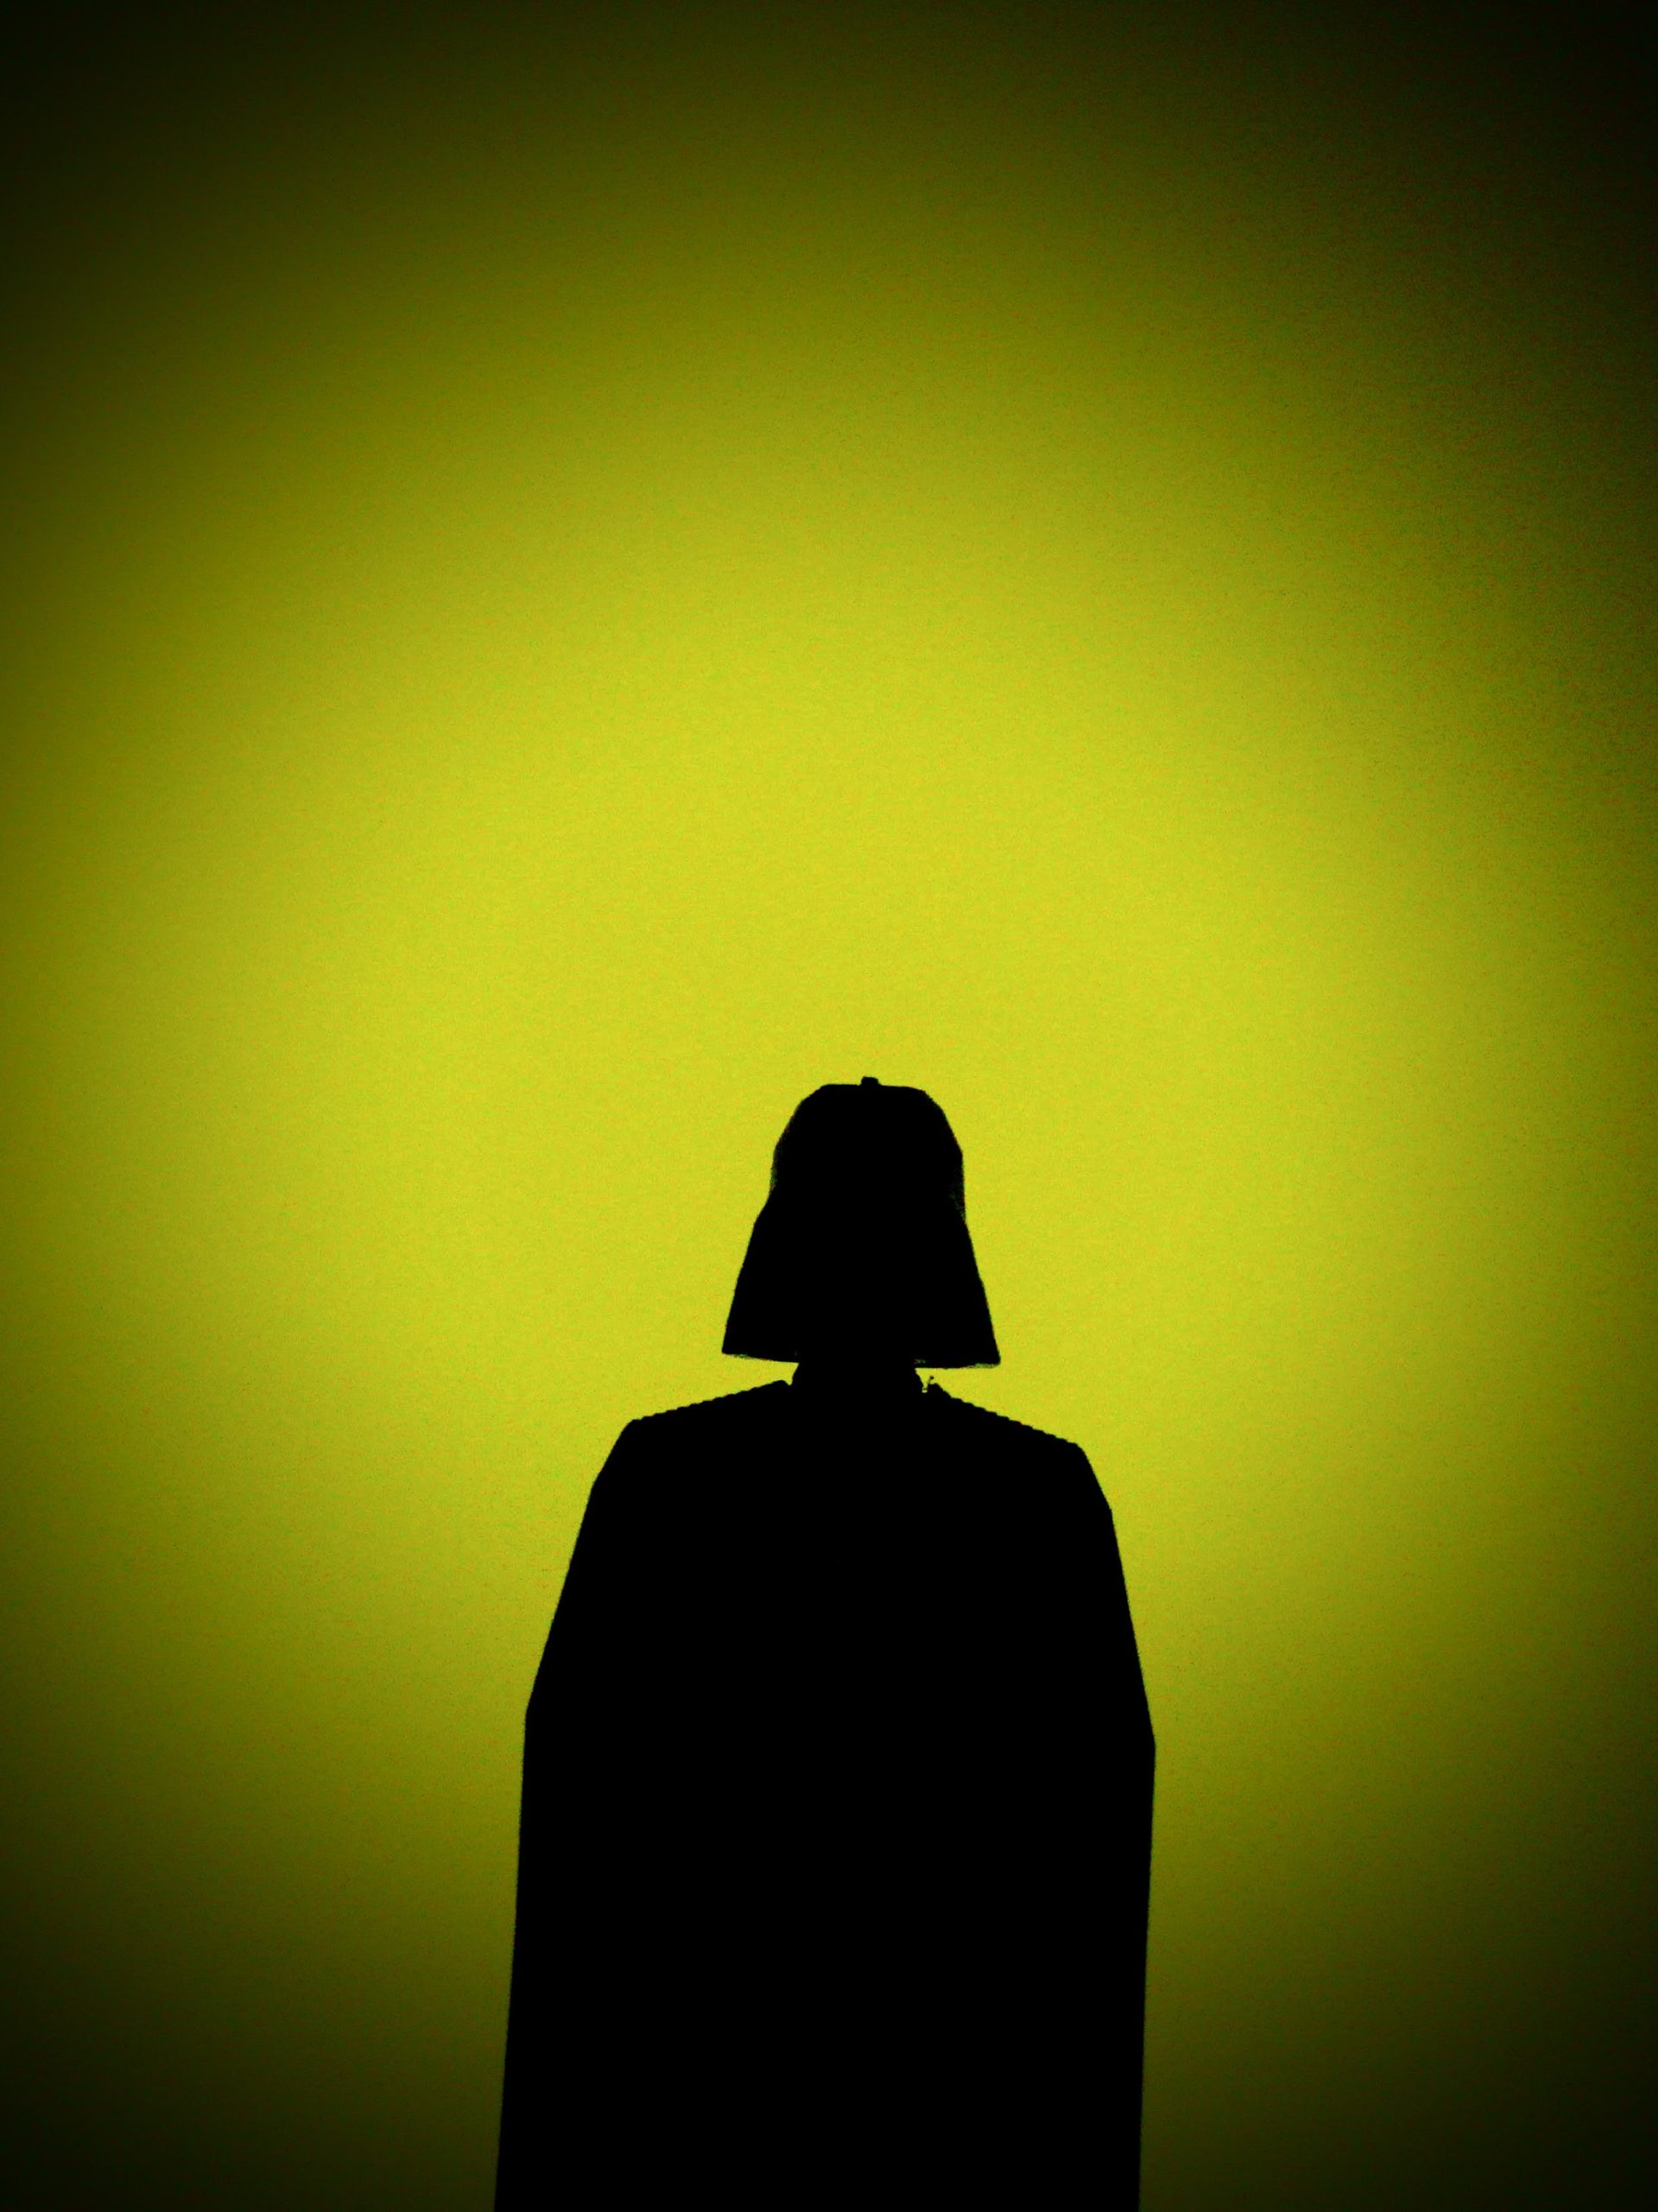 Best iOS 16 Star Wars wallpapers for iPhone (Depth effect and more)